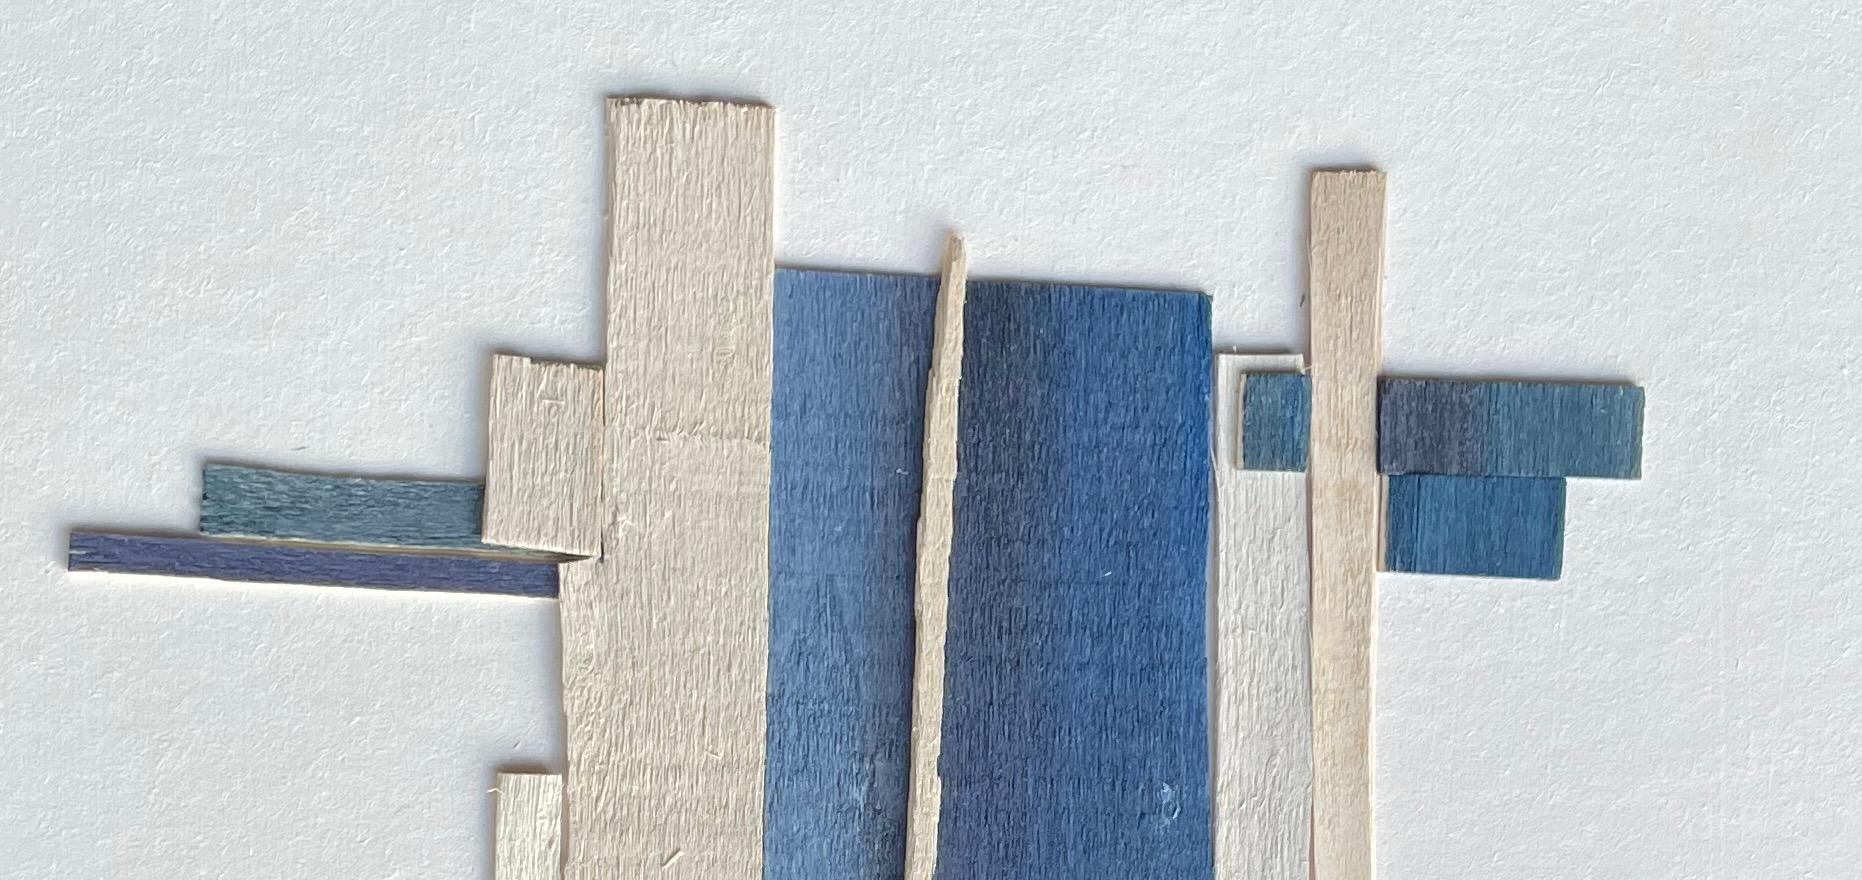 Shades of Blue and Cream Thin Slices of Wood, France, Contemporary 2